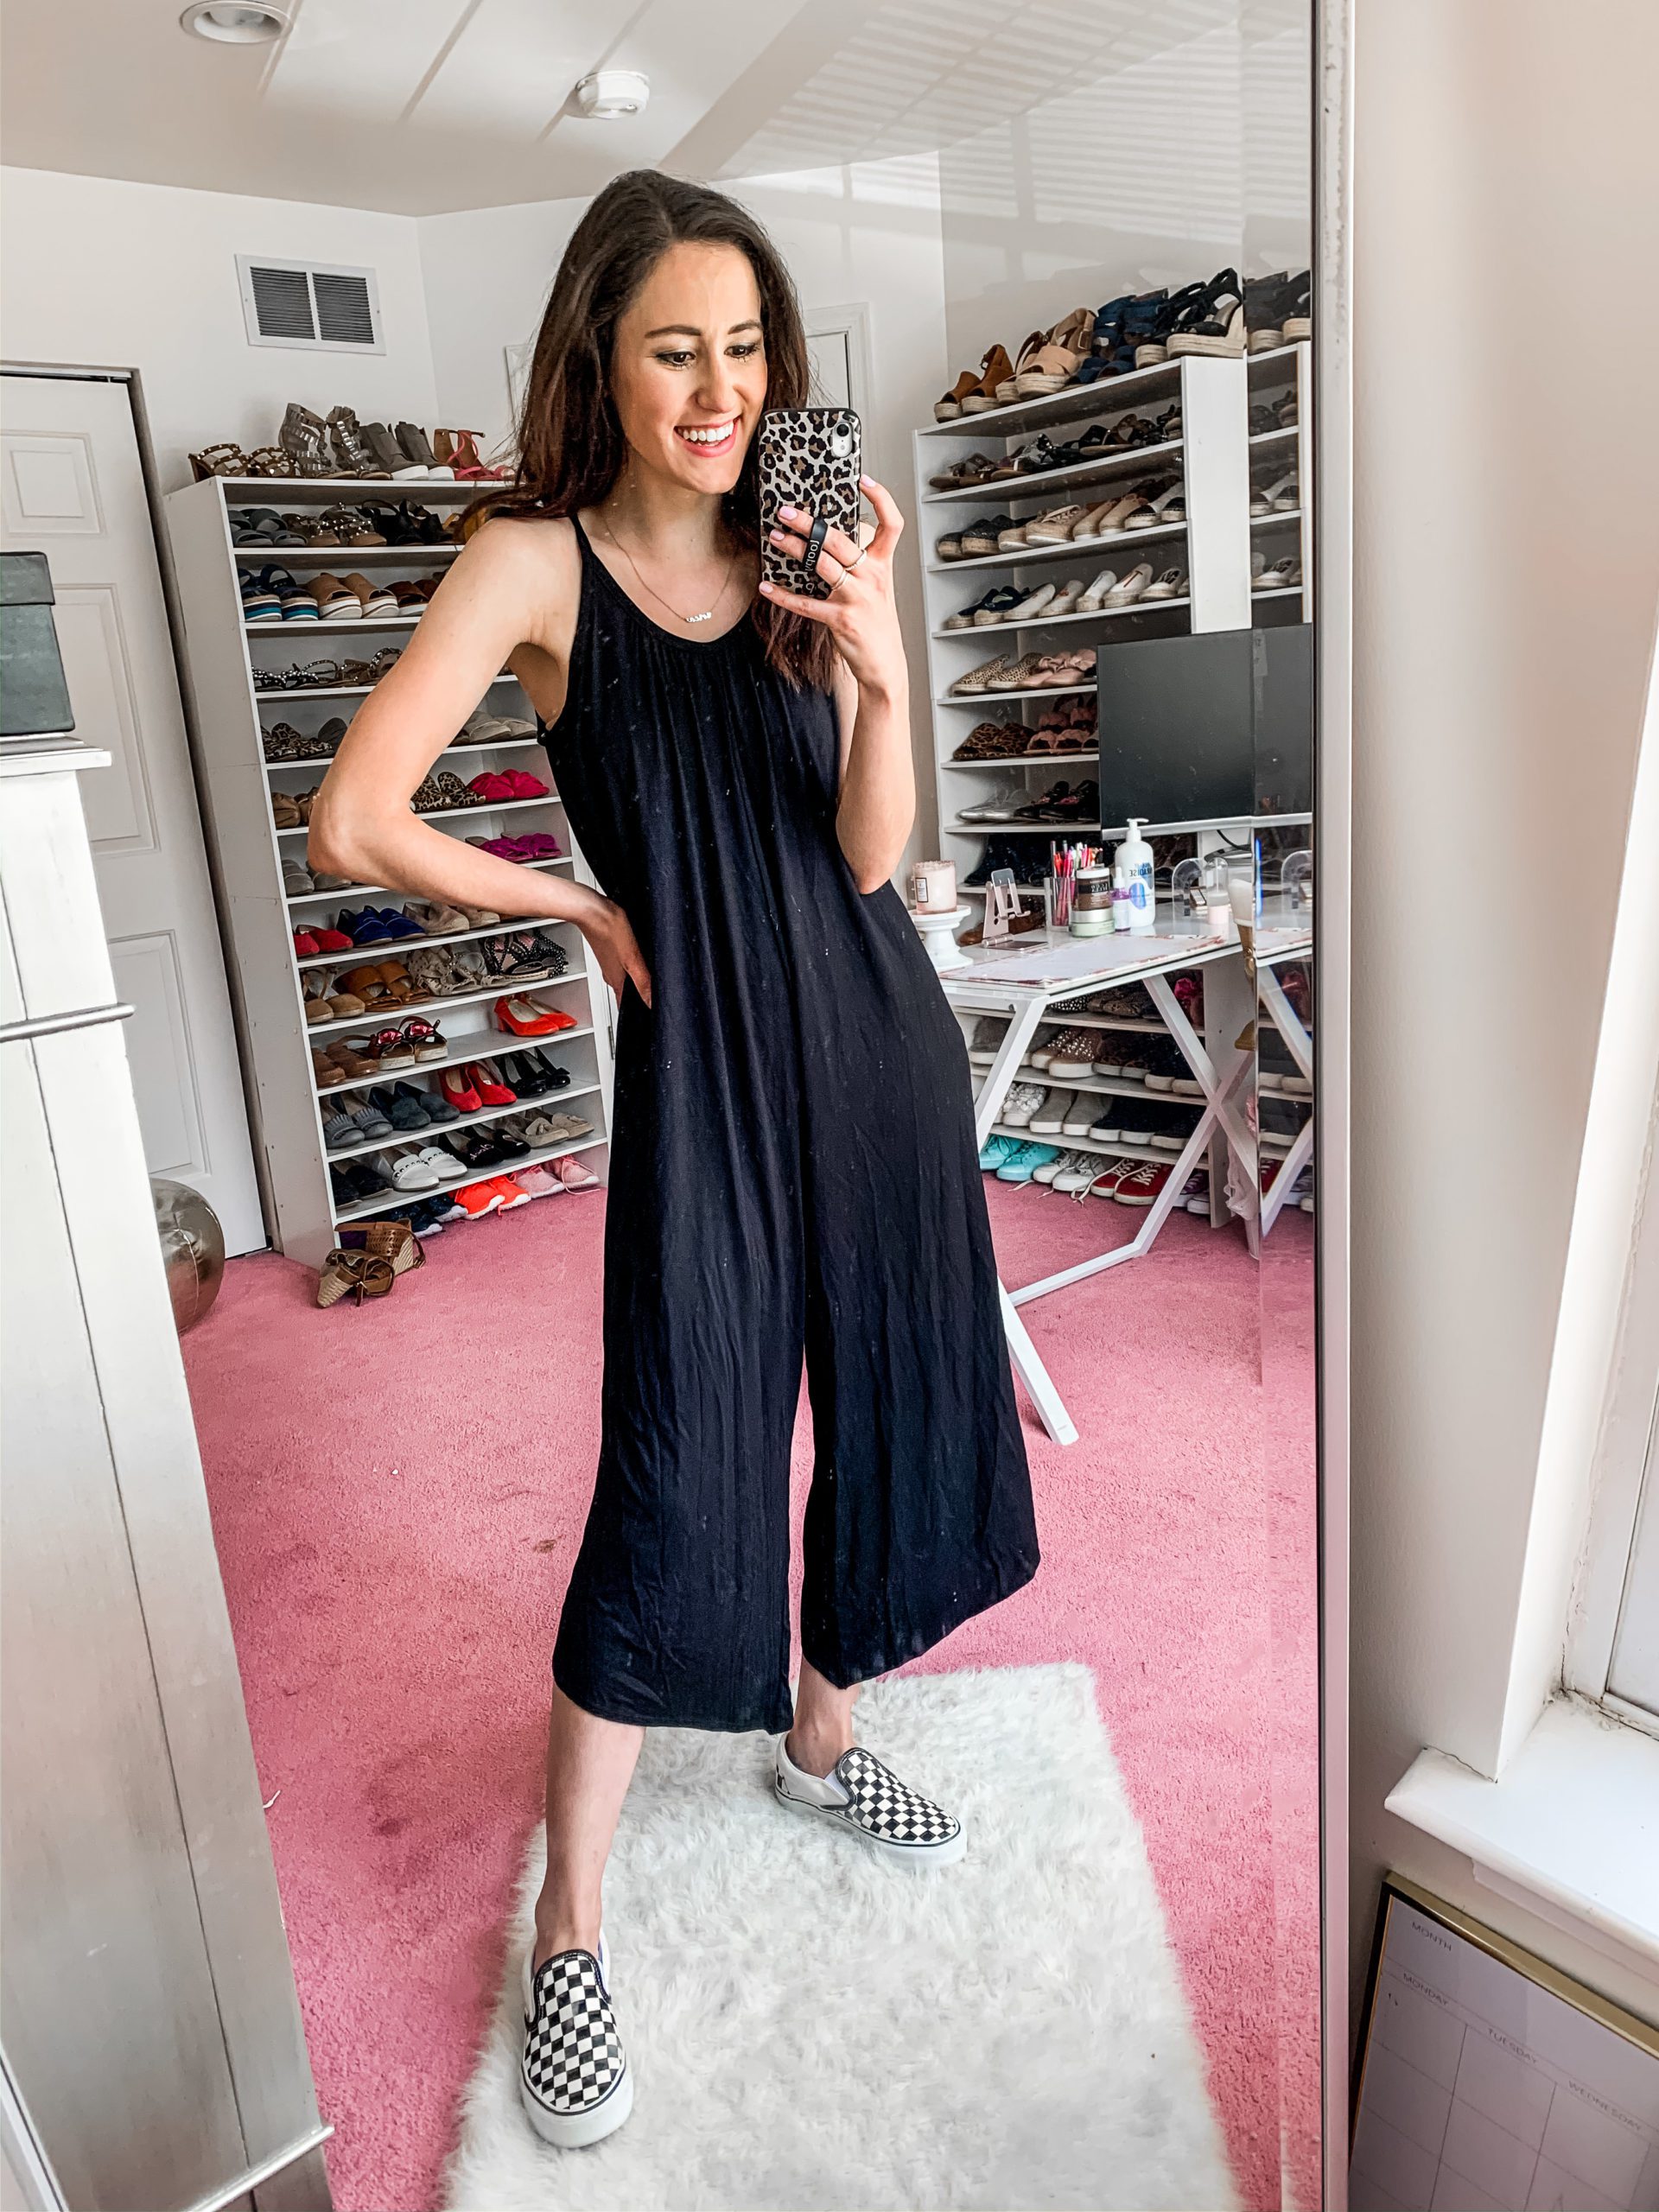 My Quarantine Uniforms: 9 Comfy, Affordable Loungewear Outfits